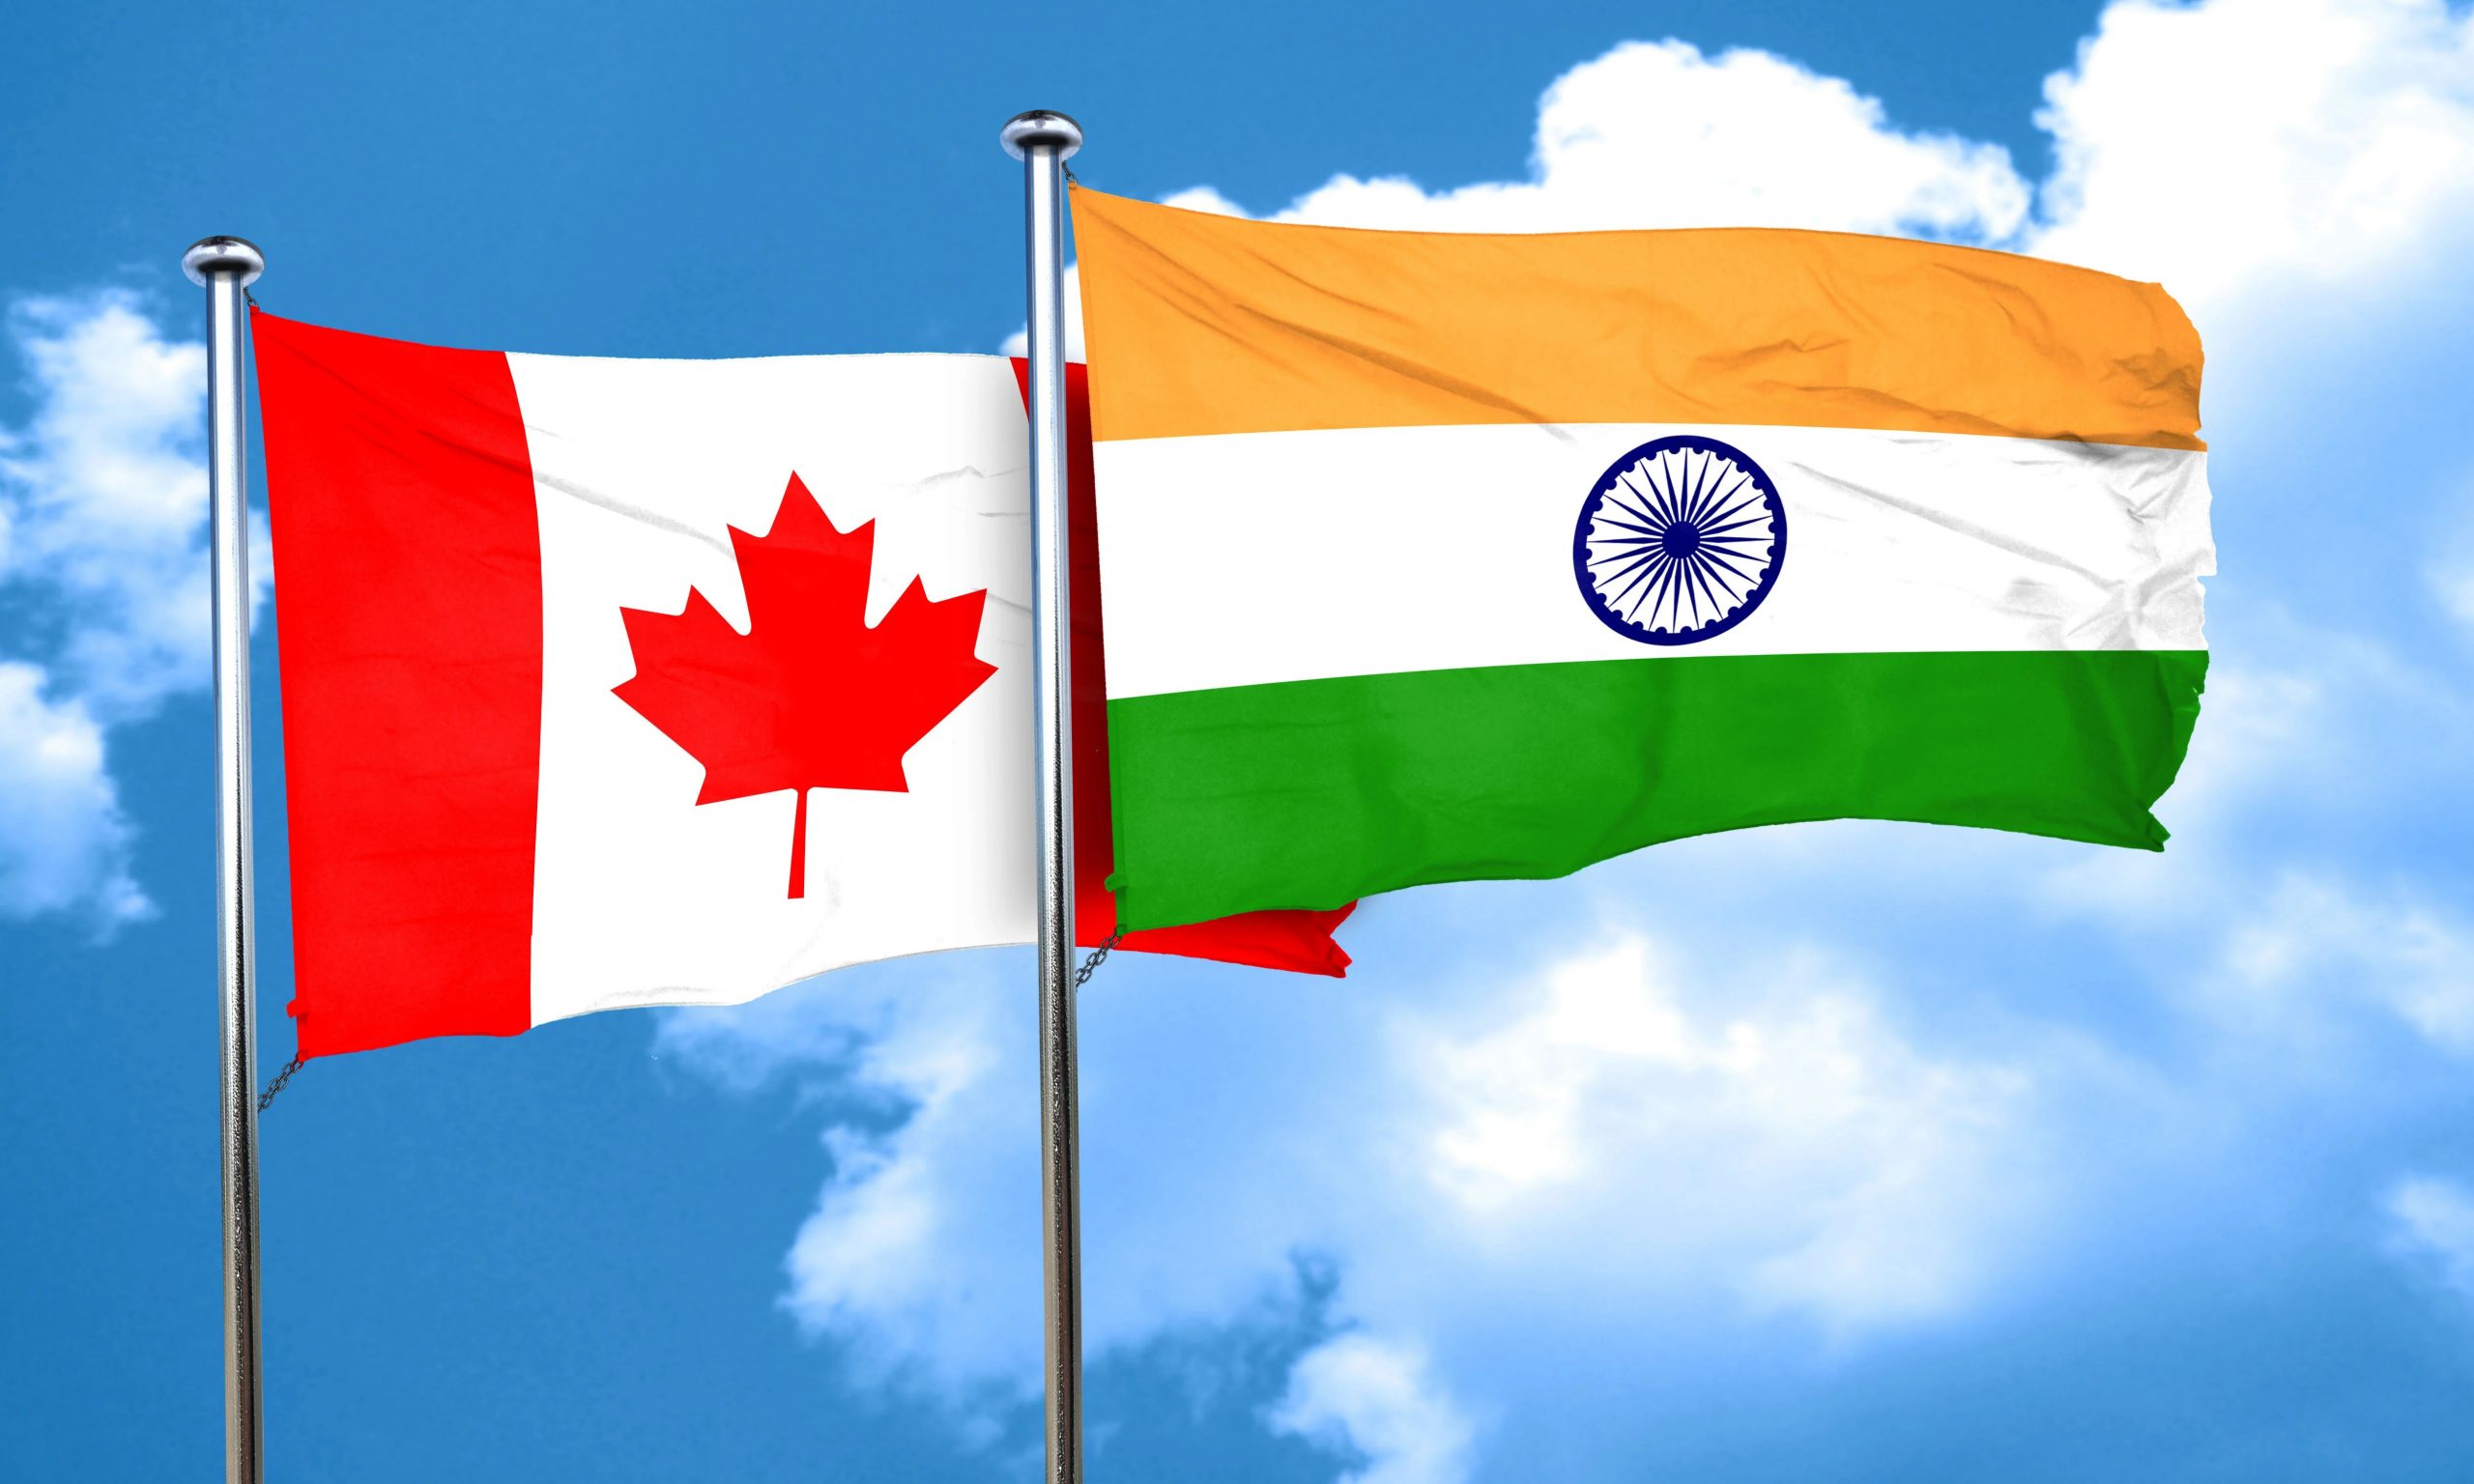 Most Popular Ways to Immigrate to Canada from India